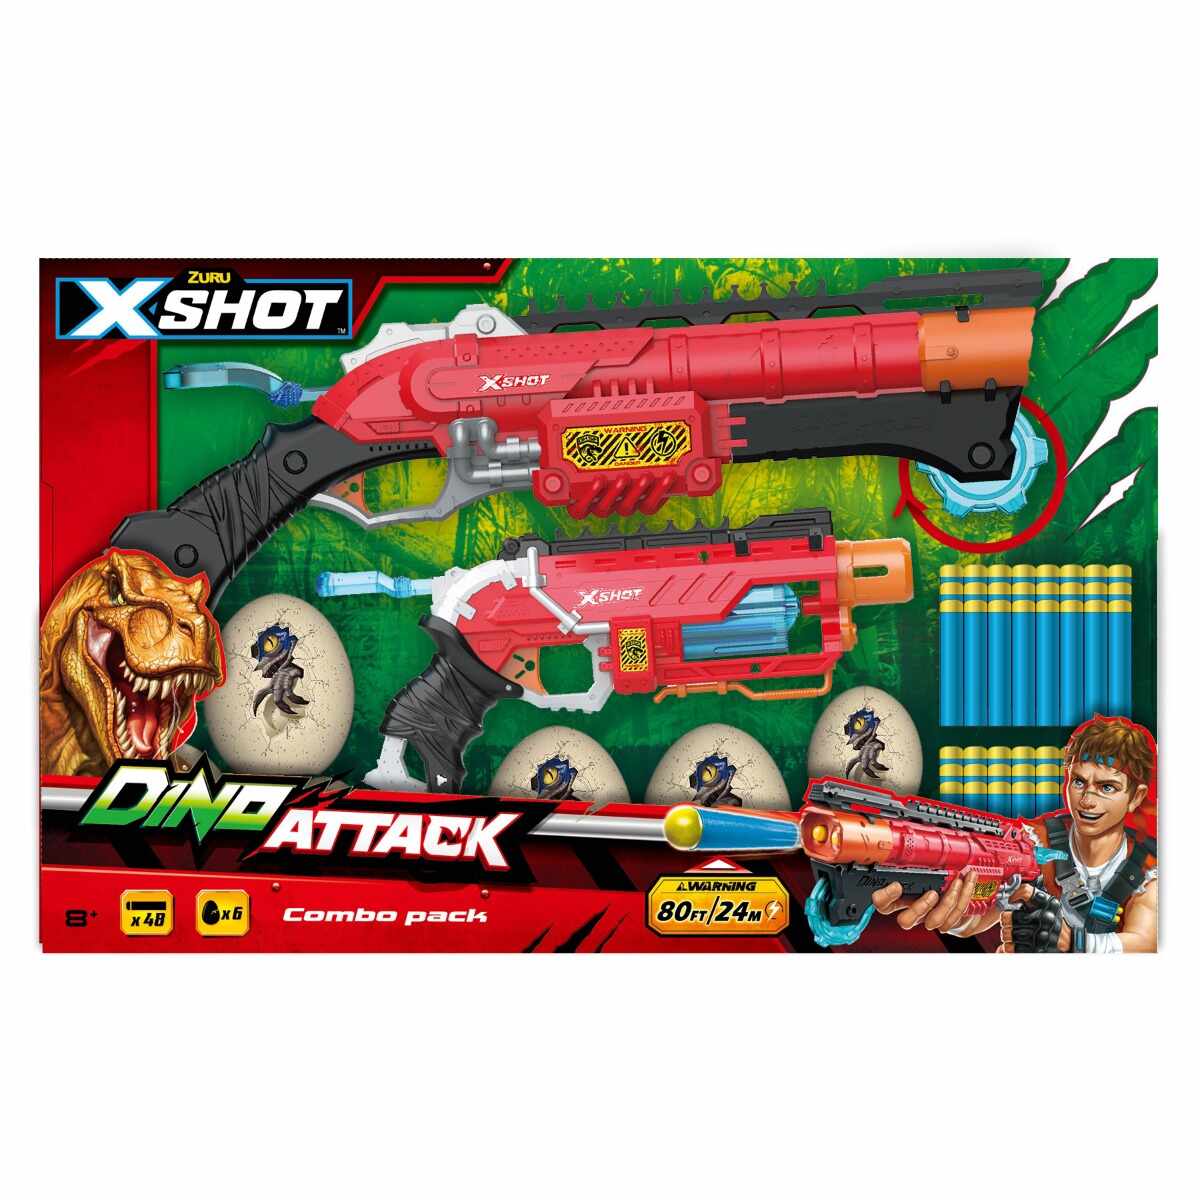 Set Blaster Dino Attack Combo Pack, 48 proiectile